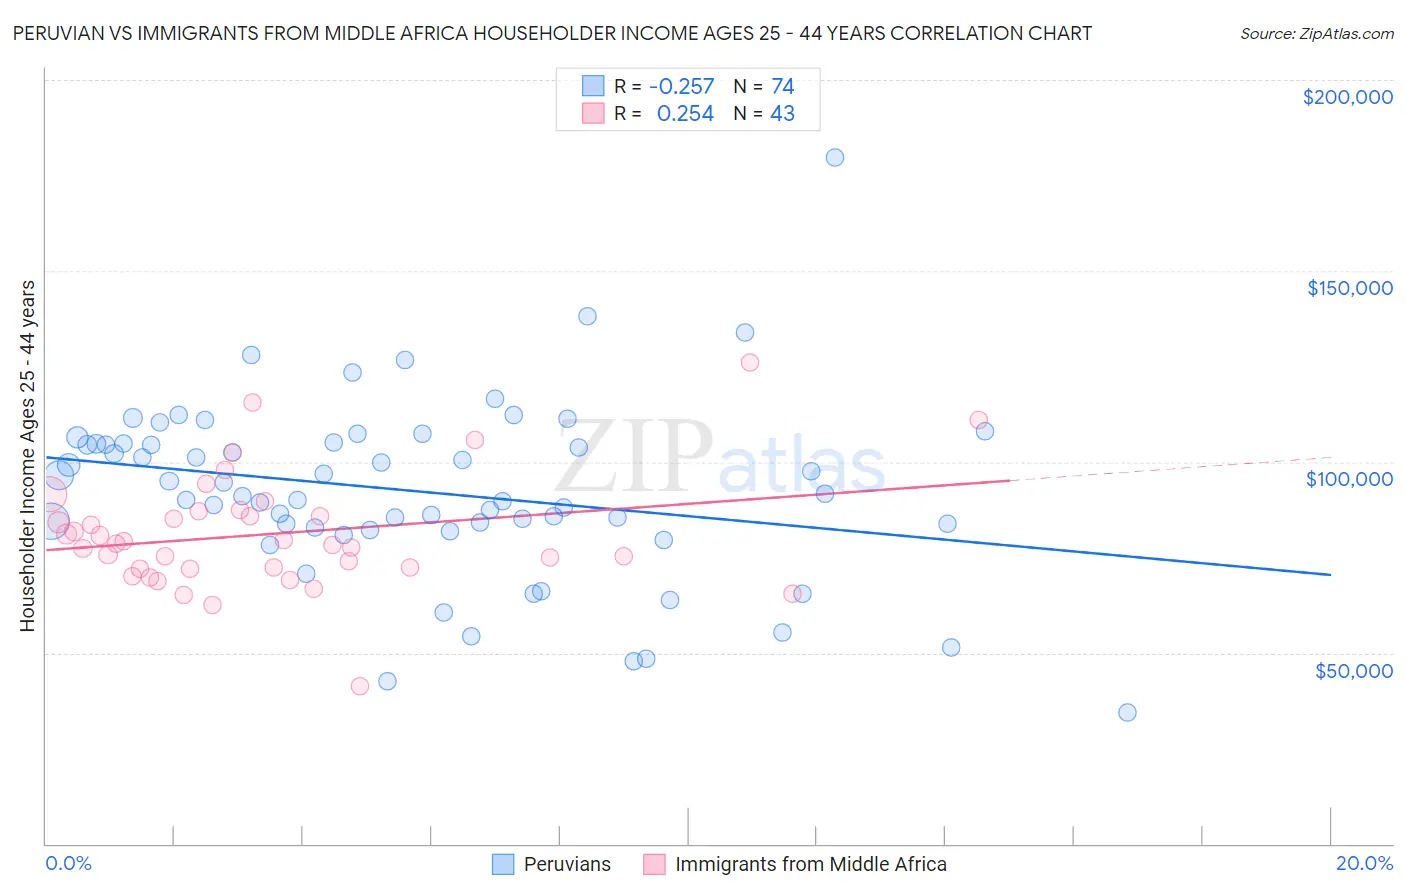 Peruvian vs Immigrants from Middle Africa Householder Income Ages 25 - 44 years